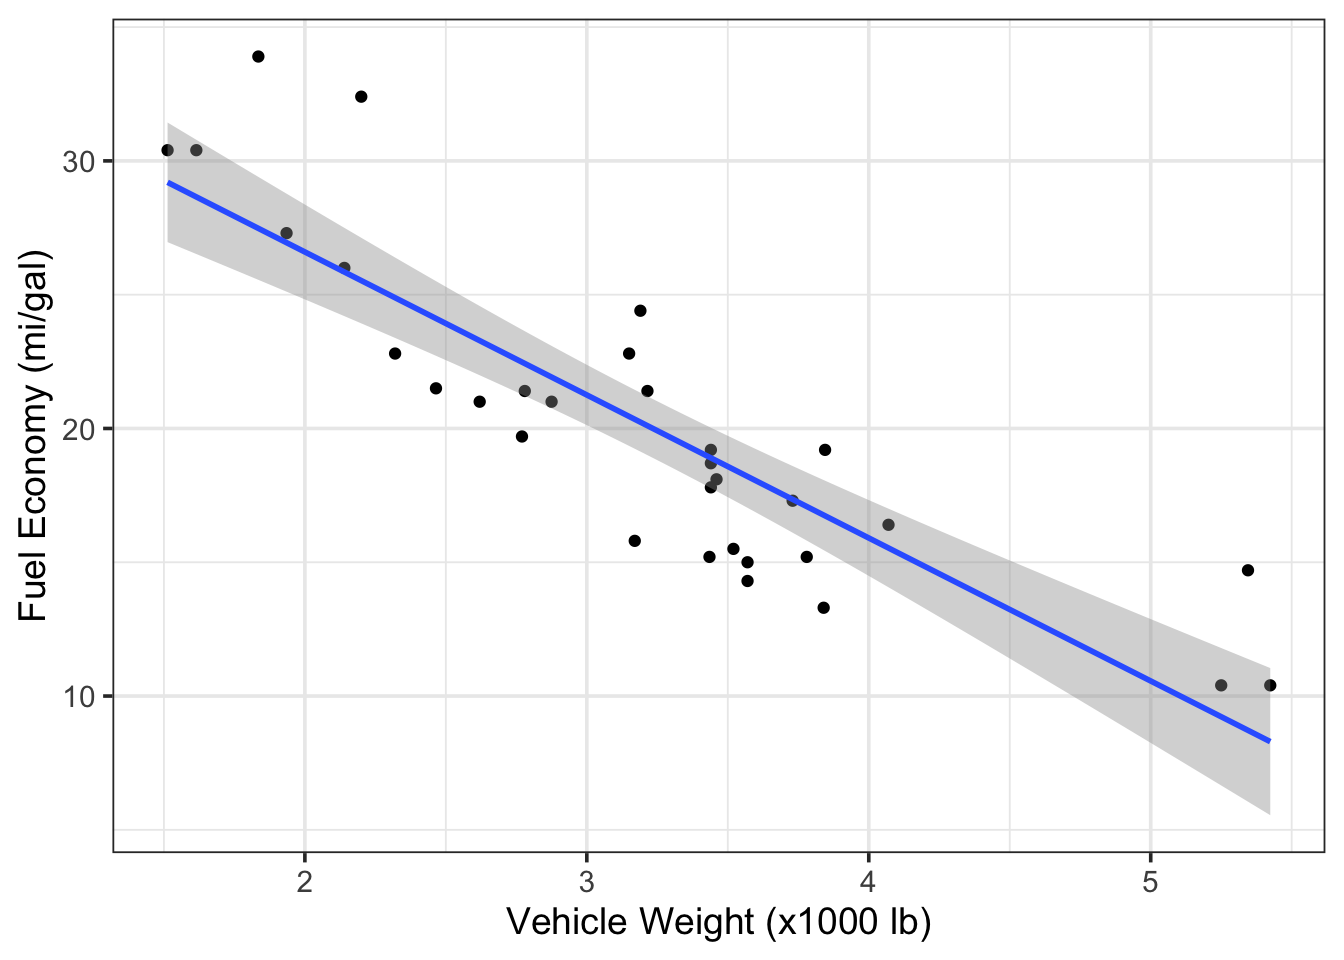 Scatterplot of fuel economy vs. vehicle weight from the `mtcars` dataset.